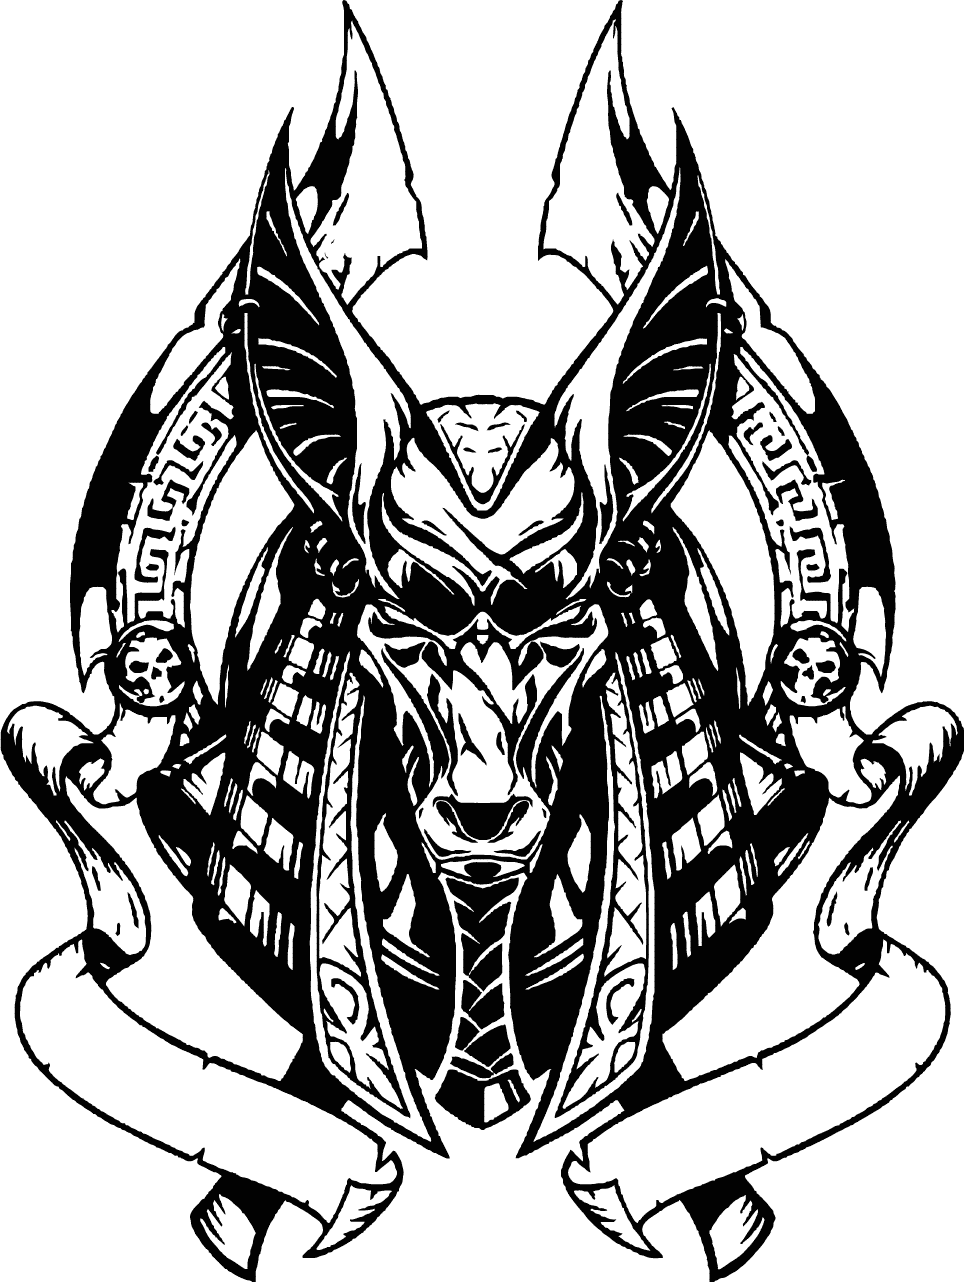 Anubis, Egyptian God of Afterlife - The Patron God of Lost Souls in